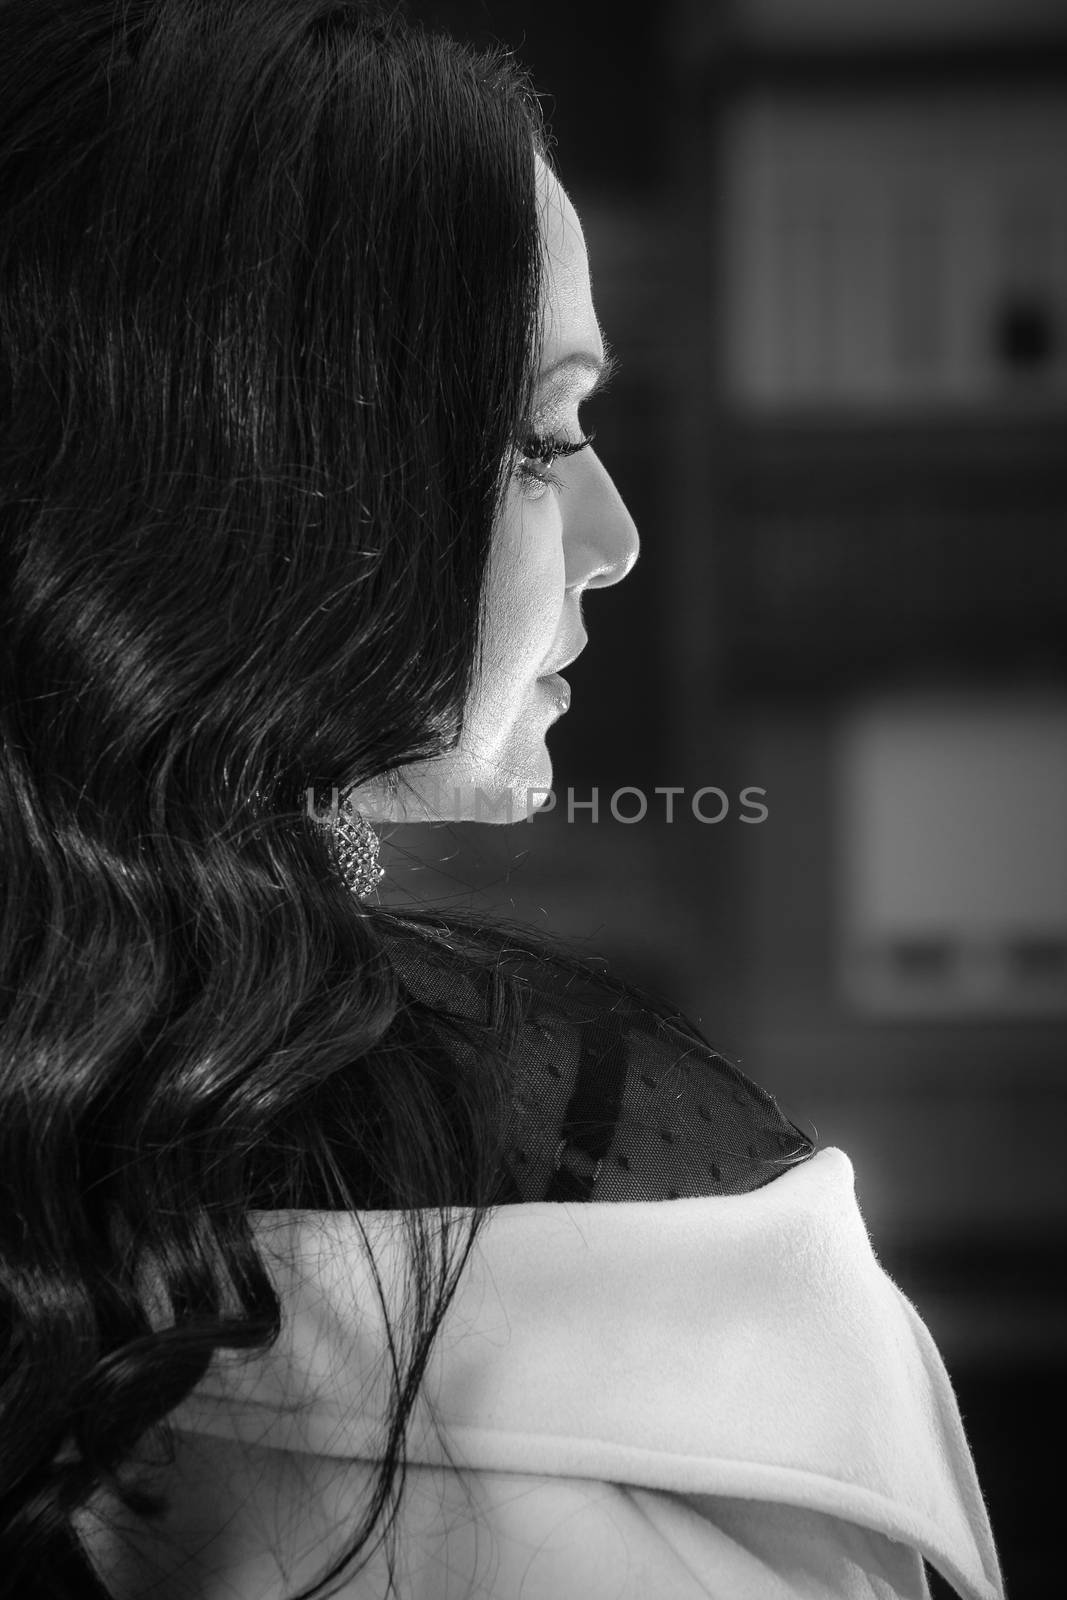 Portrait of beautiful woman looking away in darkness with light on her face. Black and white portrait, low key